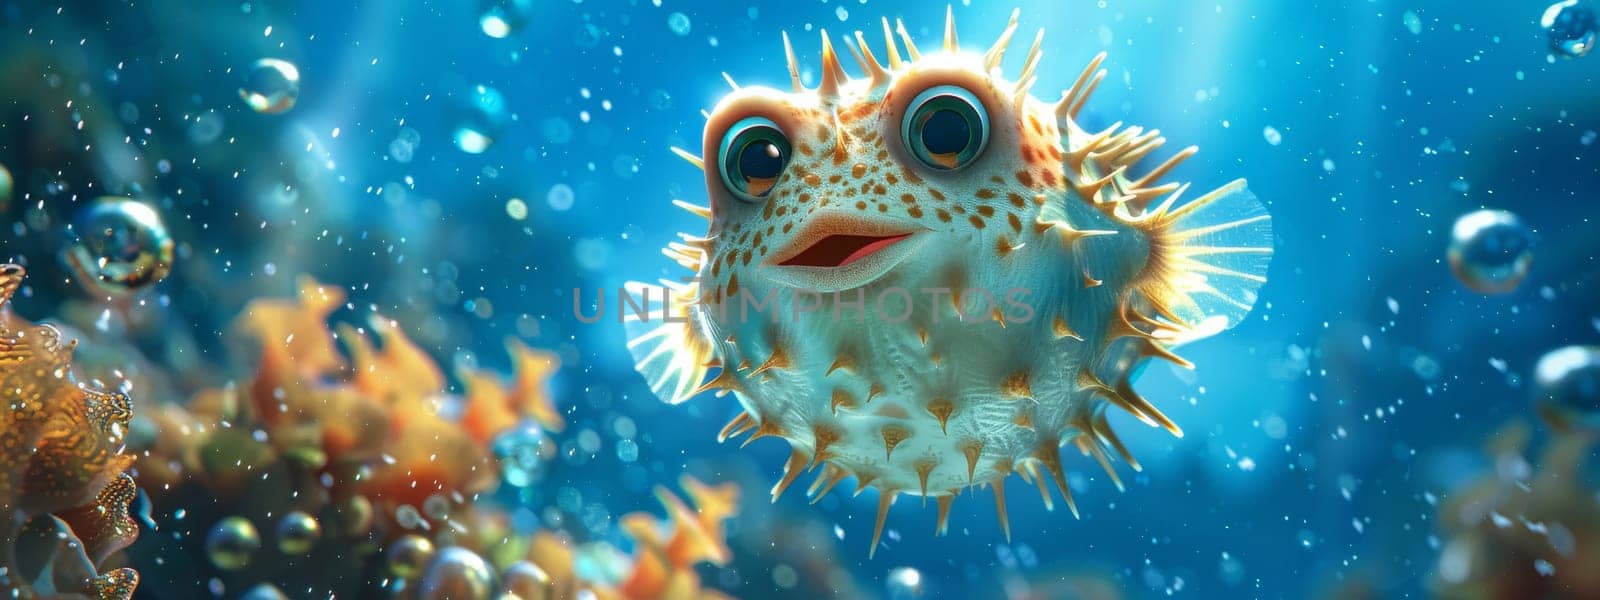 Pufferfish in the ocean underwater, nature wildlife concept by Kadula